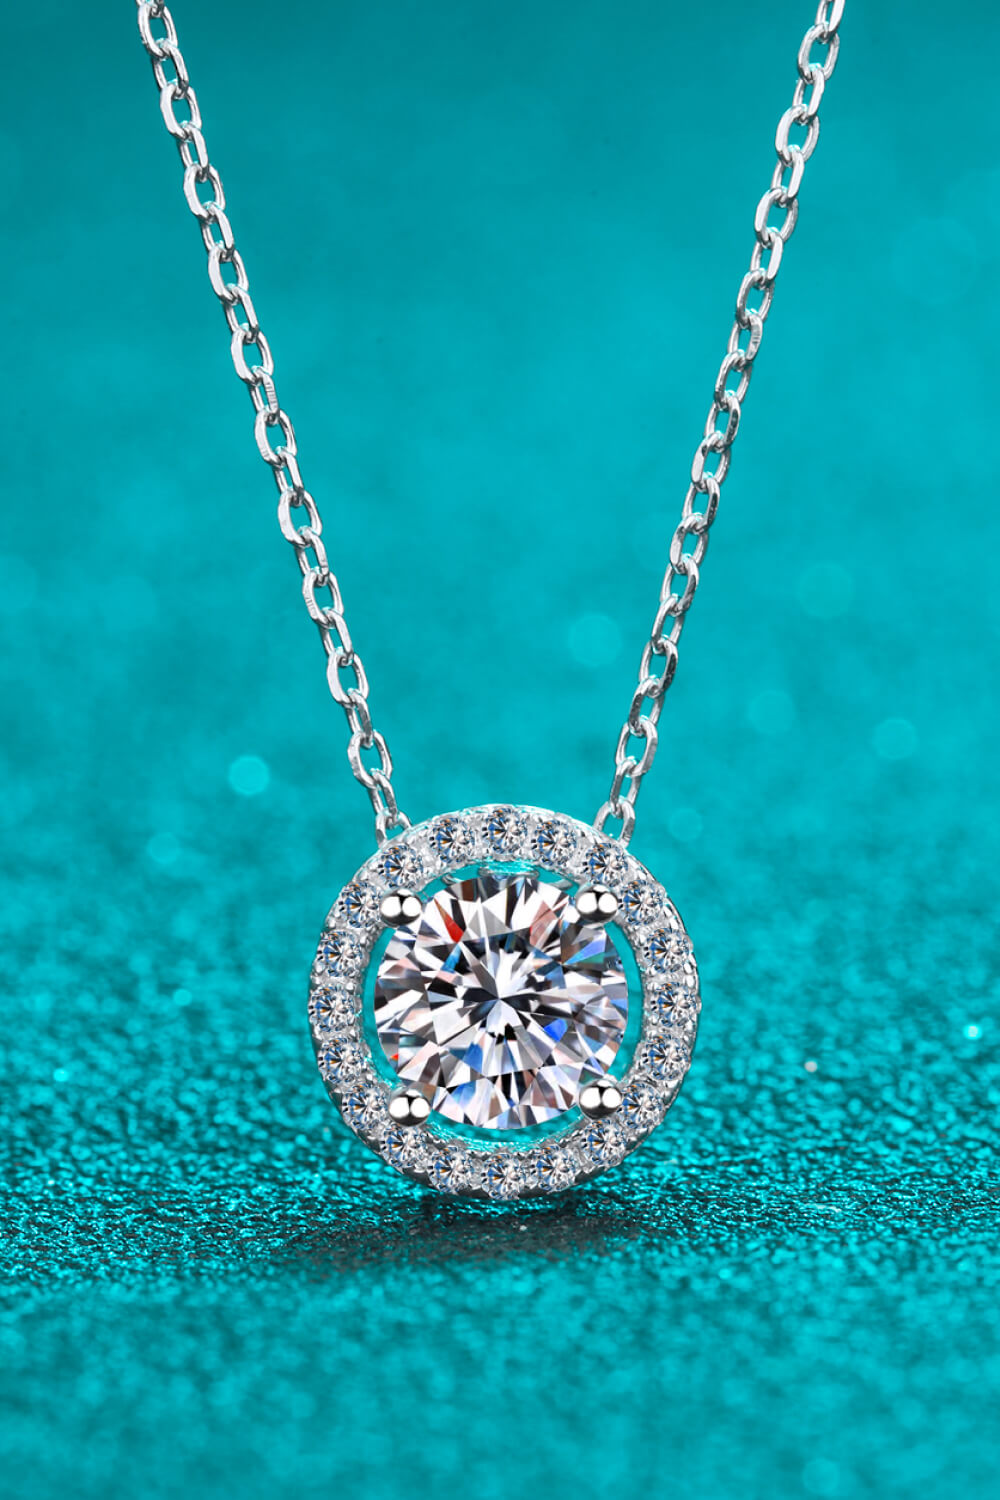 Engaged in Delight 1 Carat Moissanite Round Pendant Chain Necklace